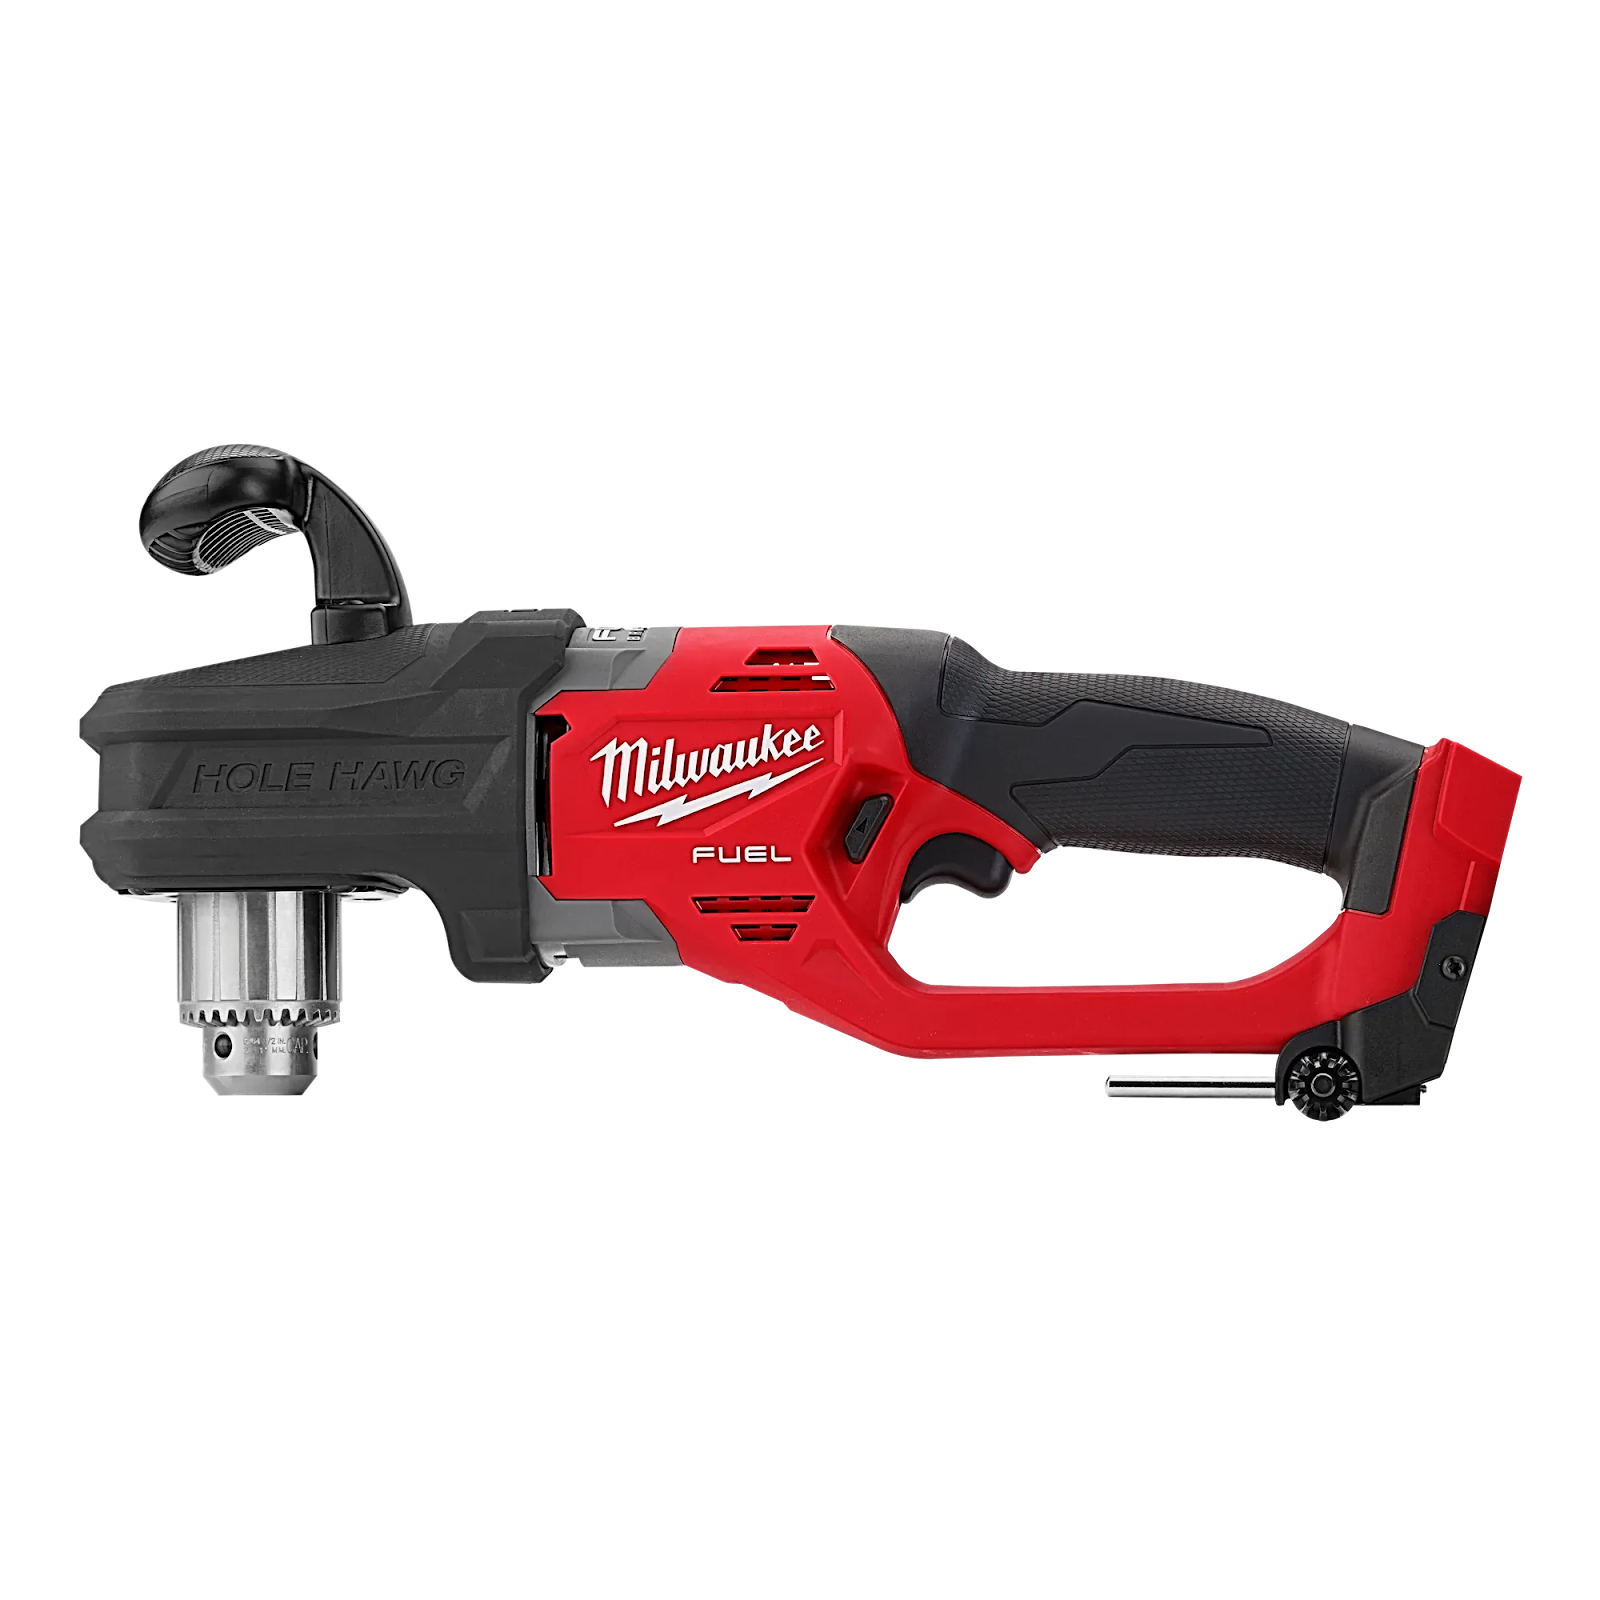 Best Power Tools for Electricians